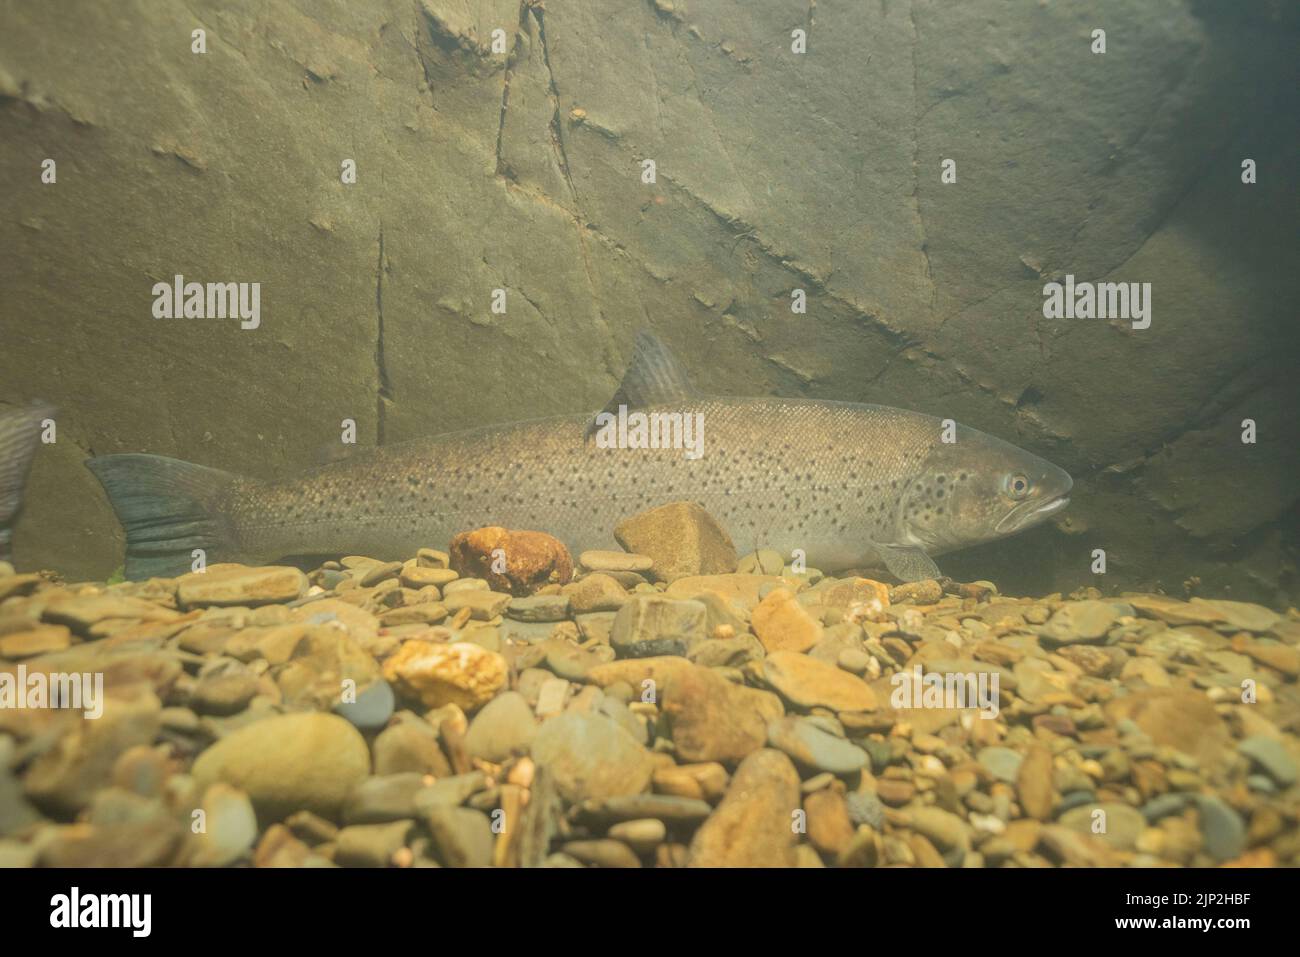 Sea trout or sewin takes refuge on a deep pool in the River Cothi during the heatwave on the 14th August, 2022. Wales, UK Stock Photo